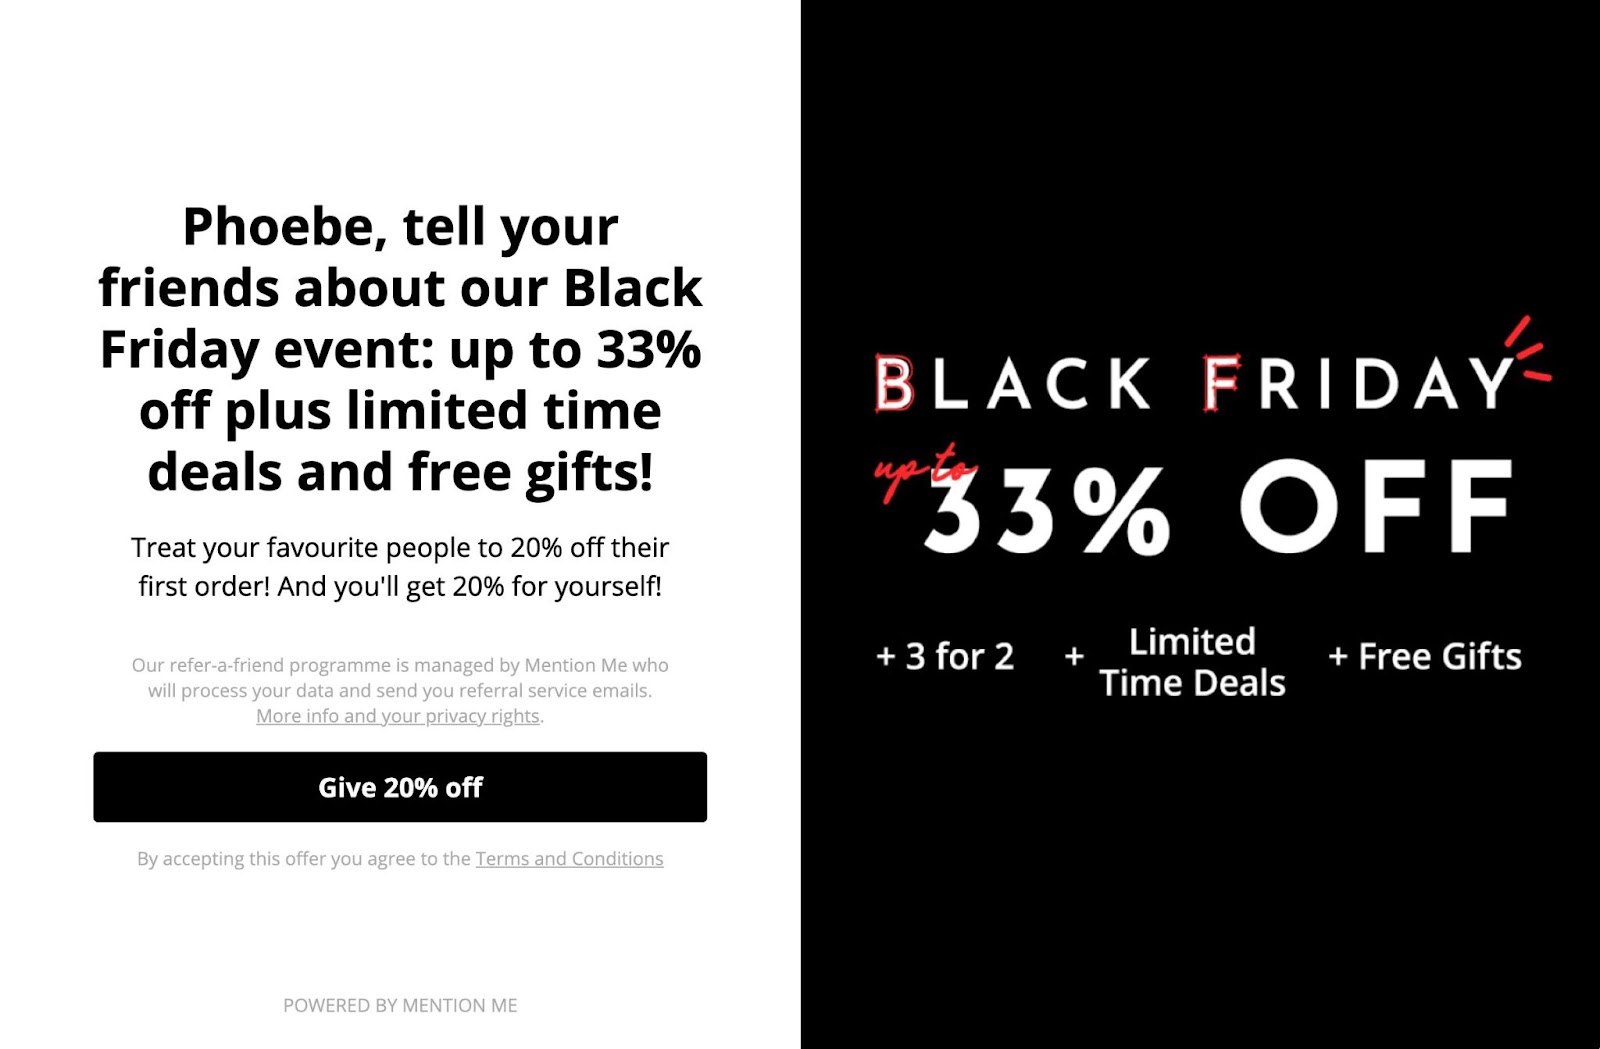 How to Prepare for Black Friday [eCommerce Edition] - RedTrack Blog